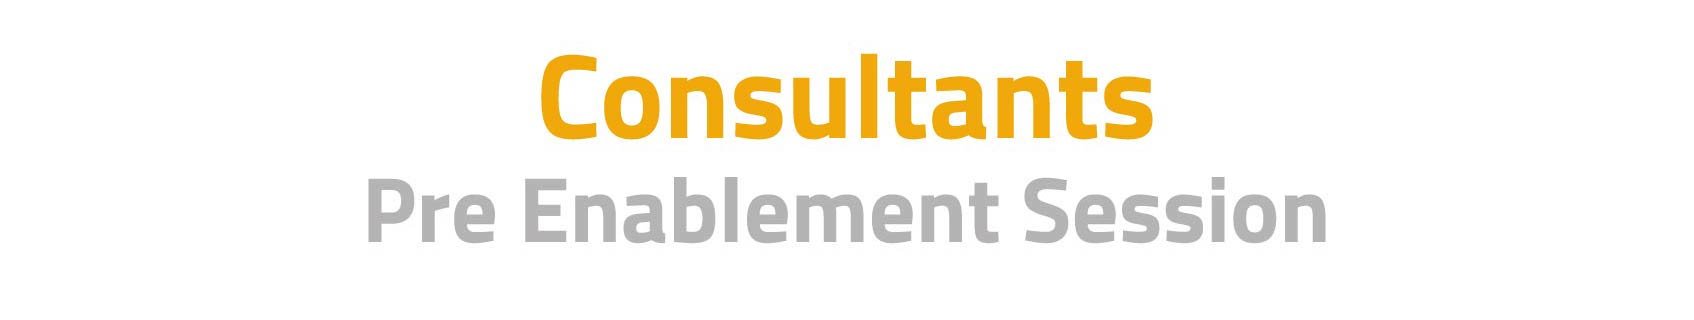 [Translate to English:] B1 Webclient Consultants pre Enablement Session